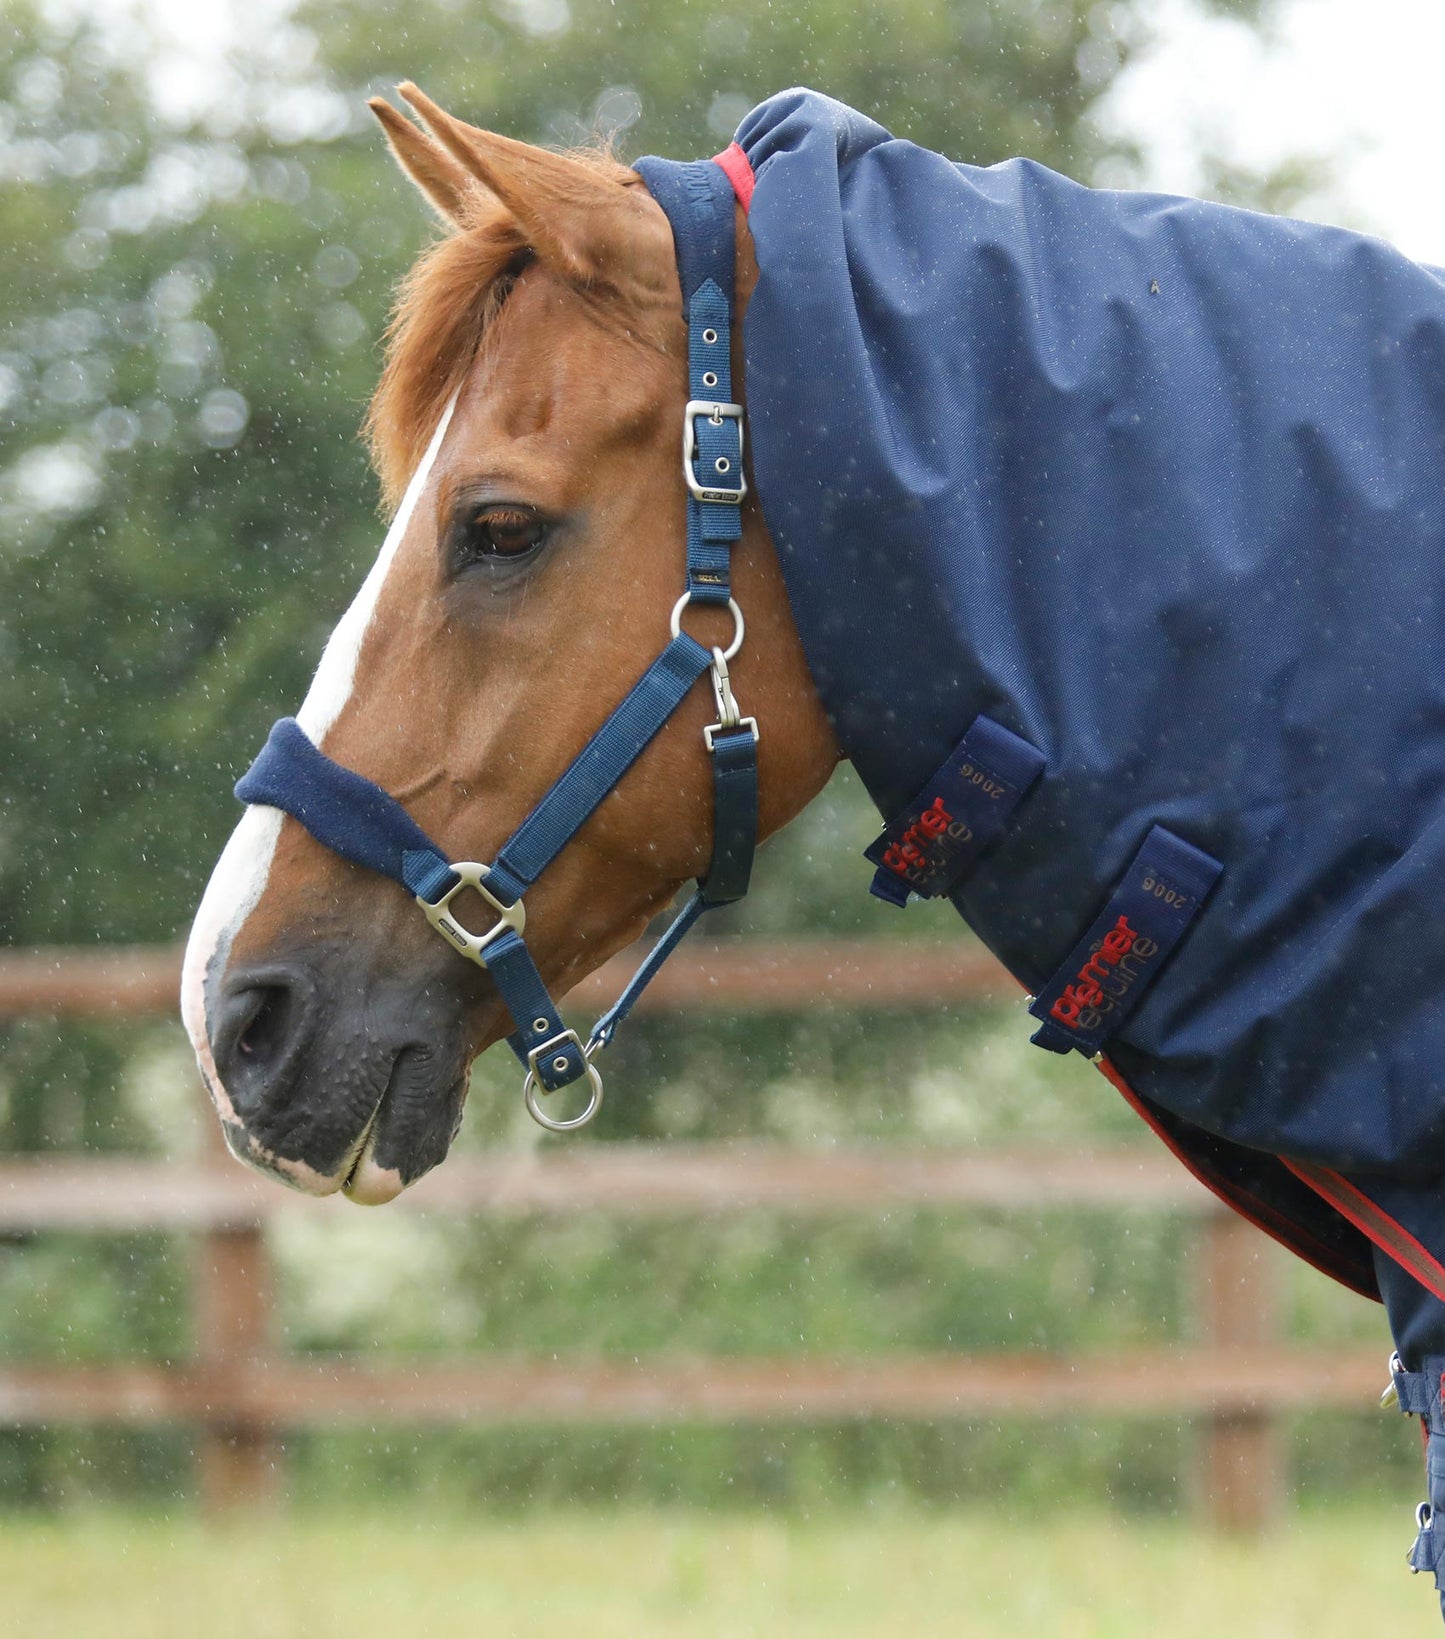 Premier Equine Titan 450g Turnout Rug with Neck Cover